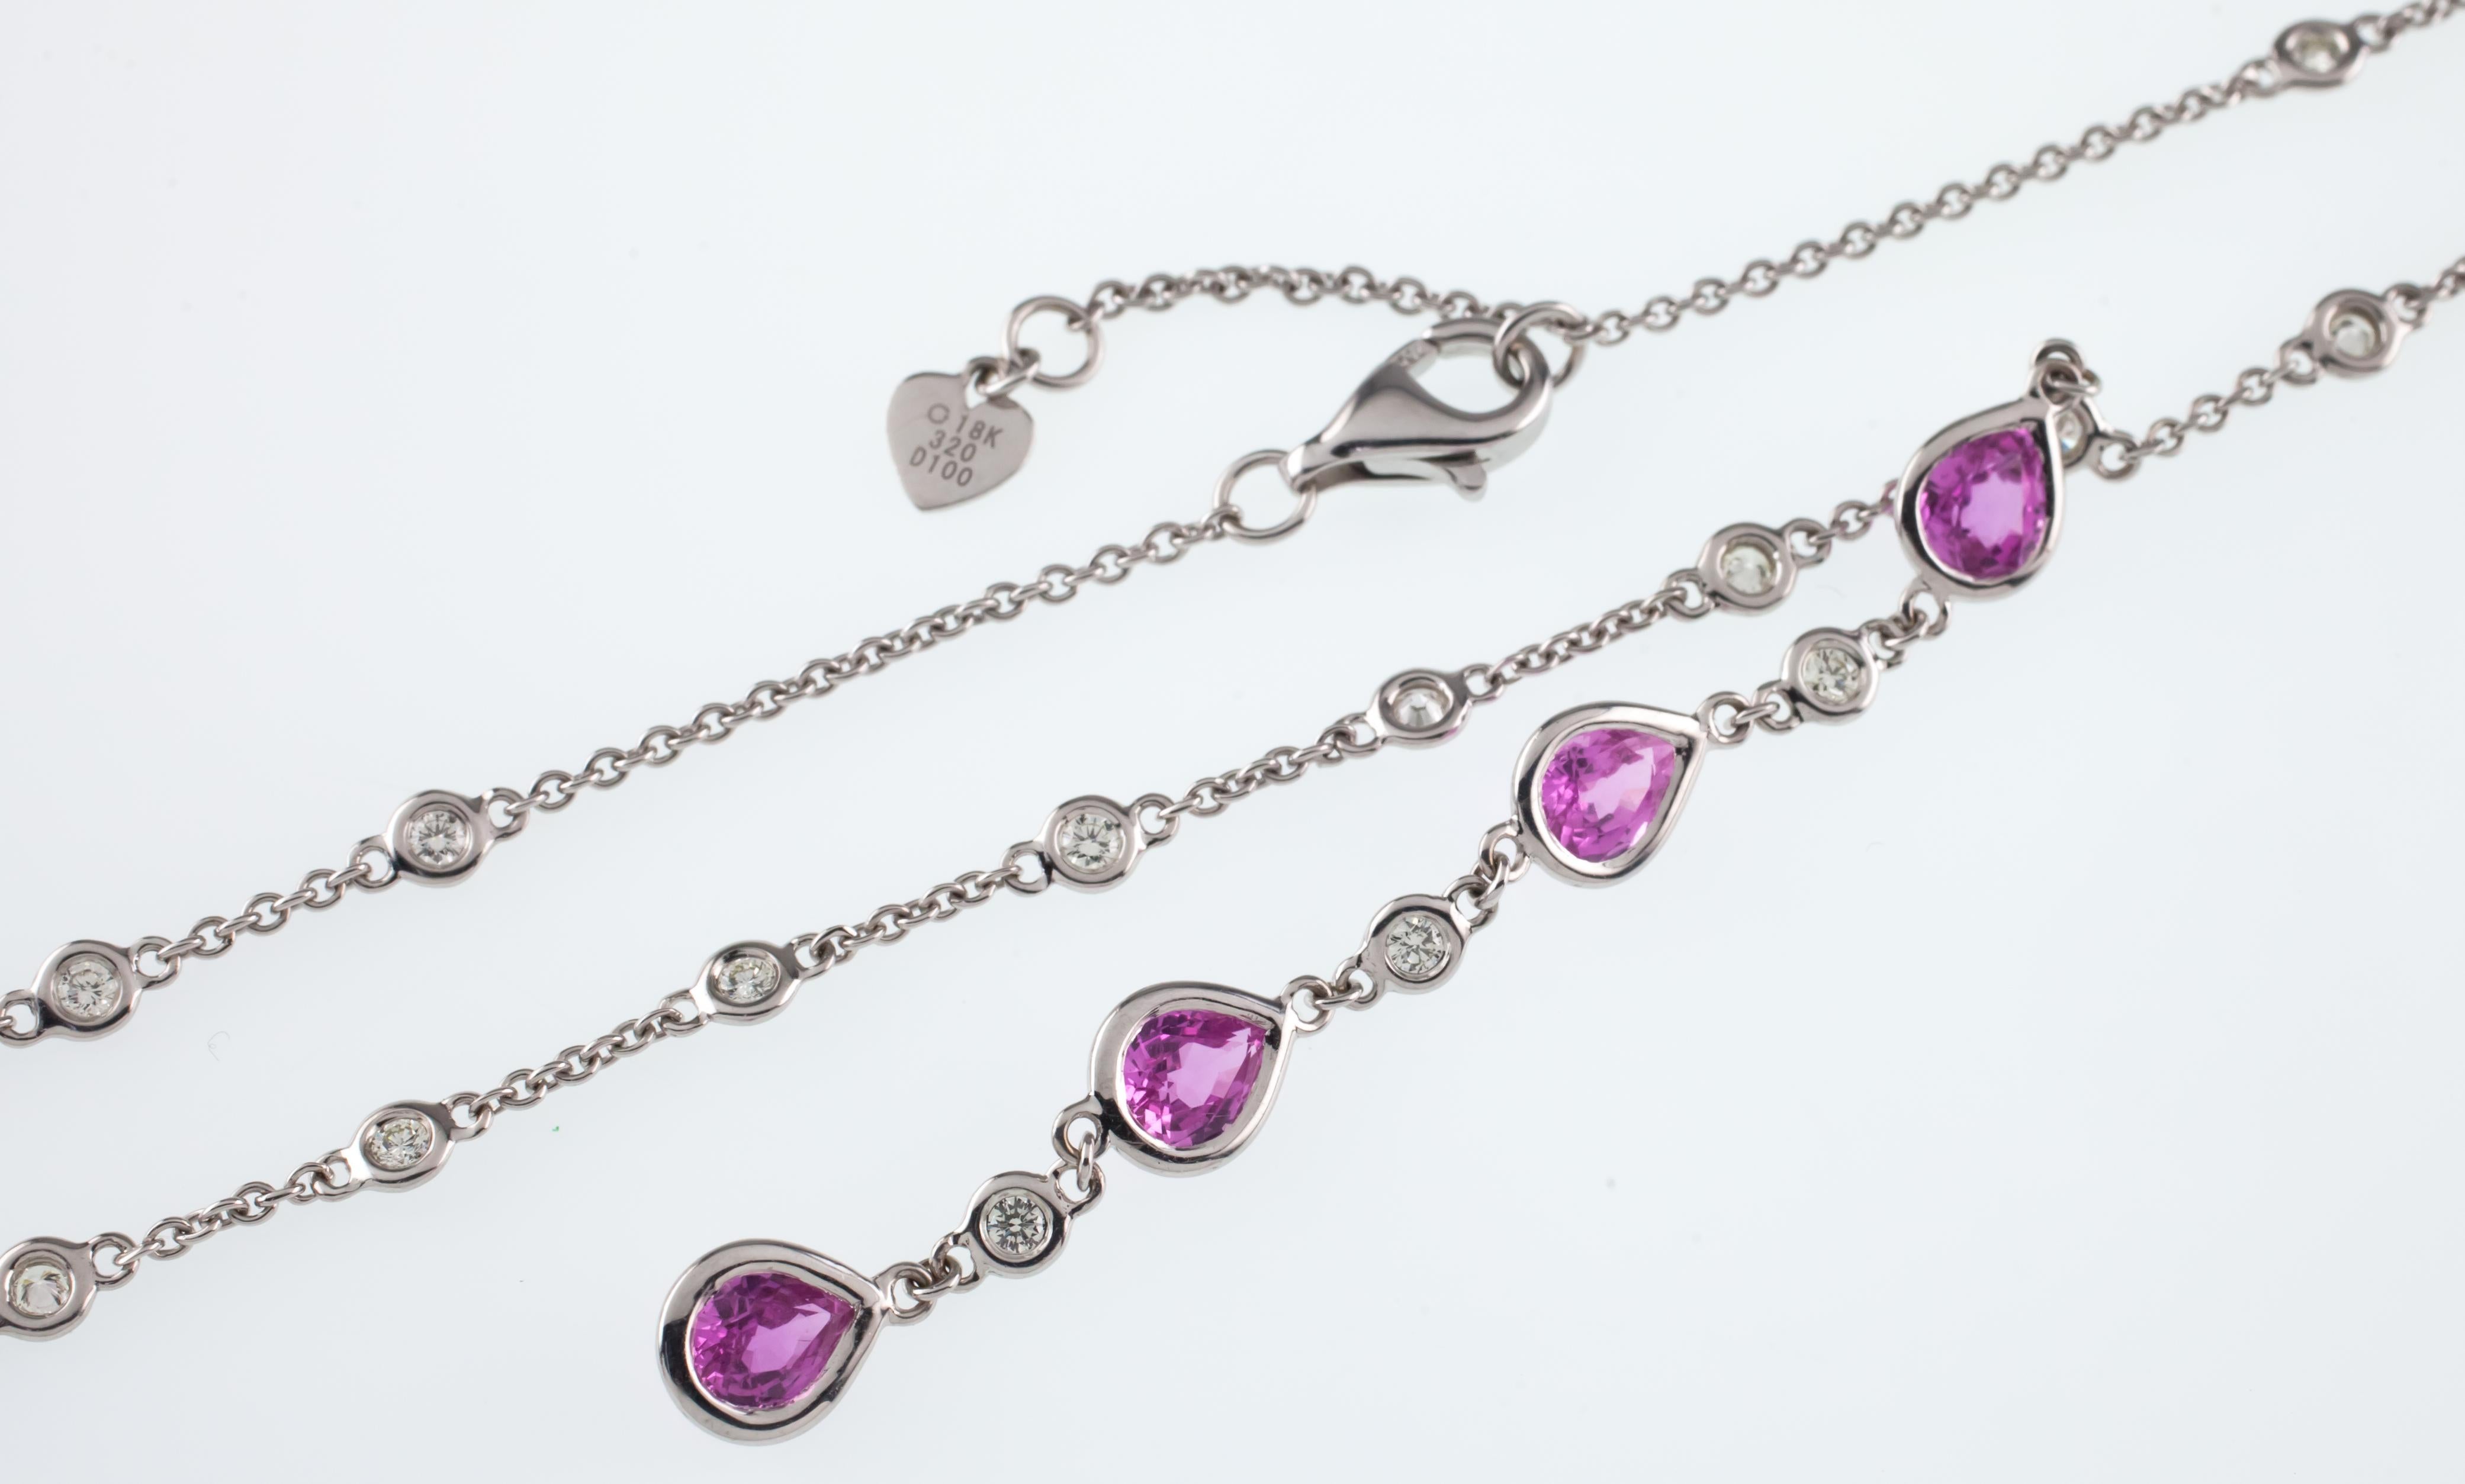 Pear Cut 4.2 Carat Diamond and Pink Sapphire White Gold Necklace with Drop Pendant For Sale